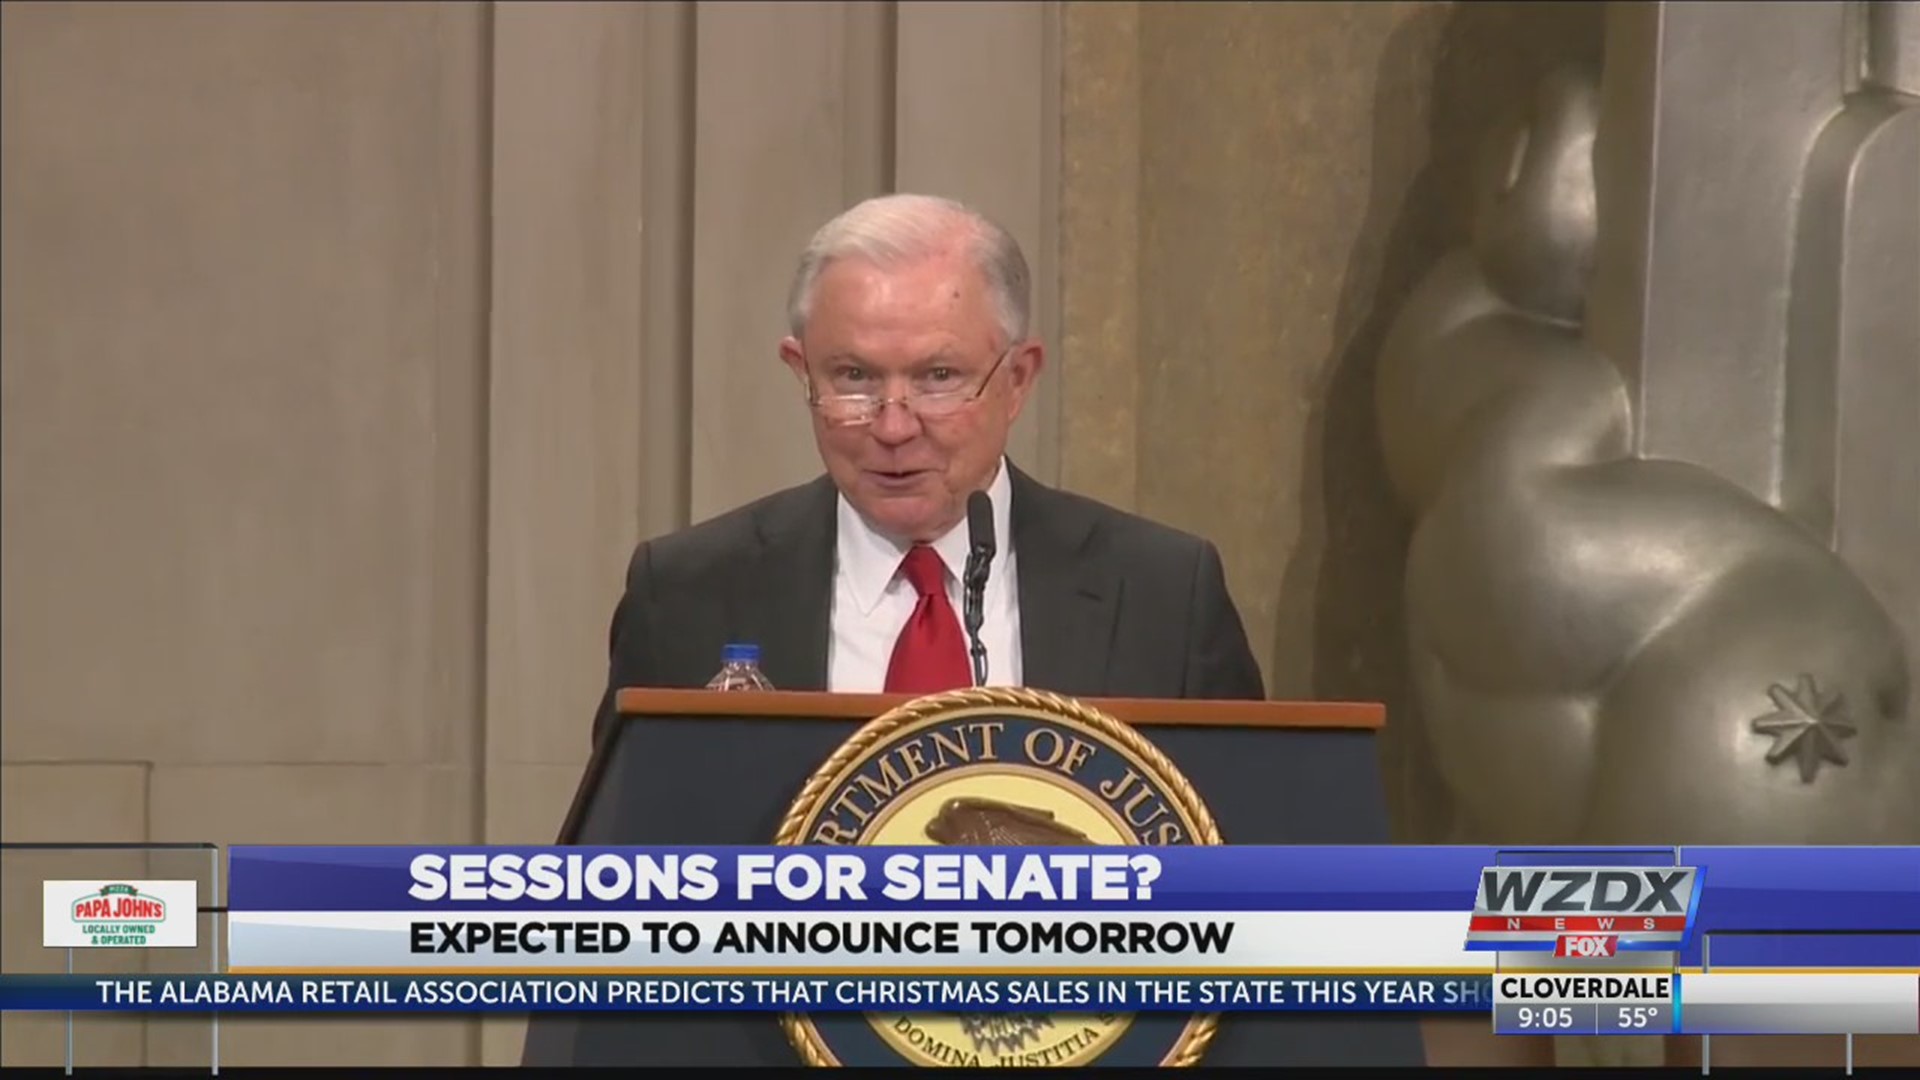 Former Attorney General Jeff Sessions will announce that he is entering the race for his old U.S. Senate seat in Alabama, two Republicans with direct knowledge of his plans said Wednesday.